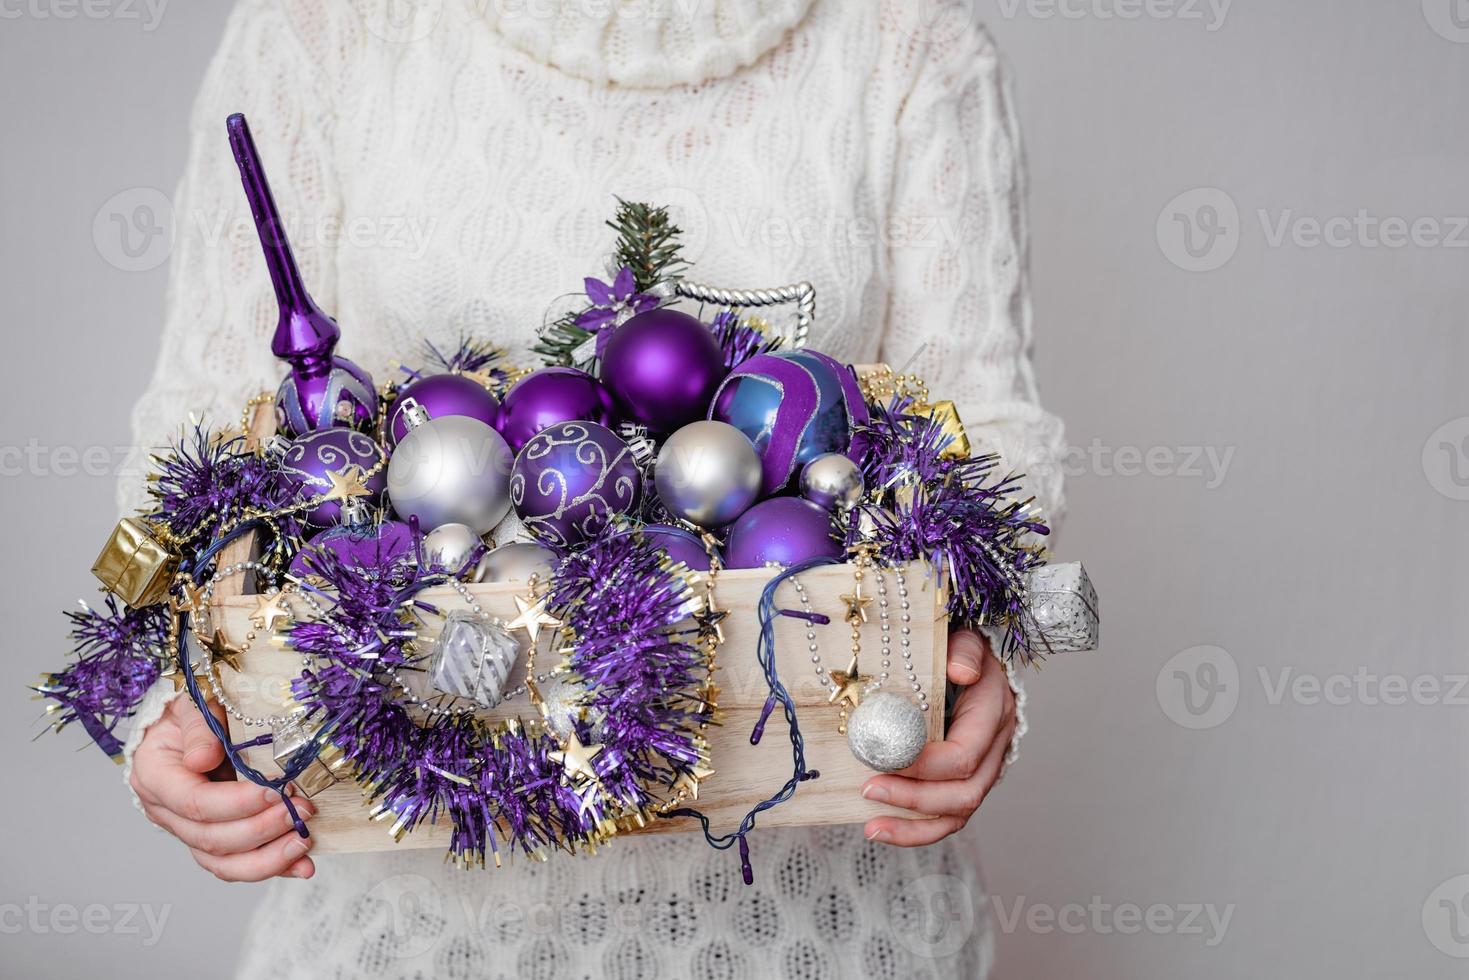 Woman holding a full wooden box of Christmas tree decorations photo